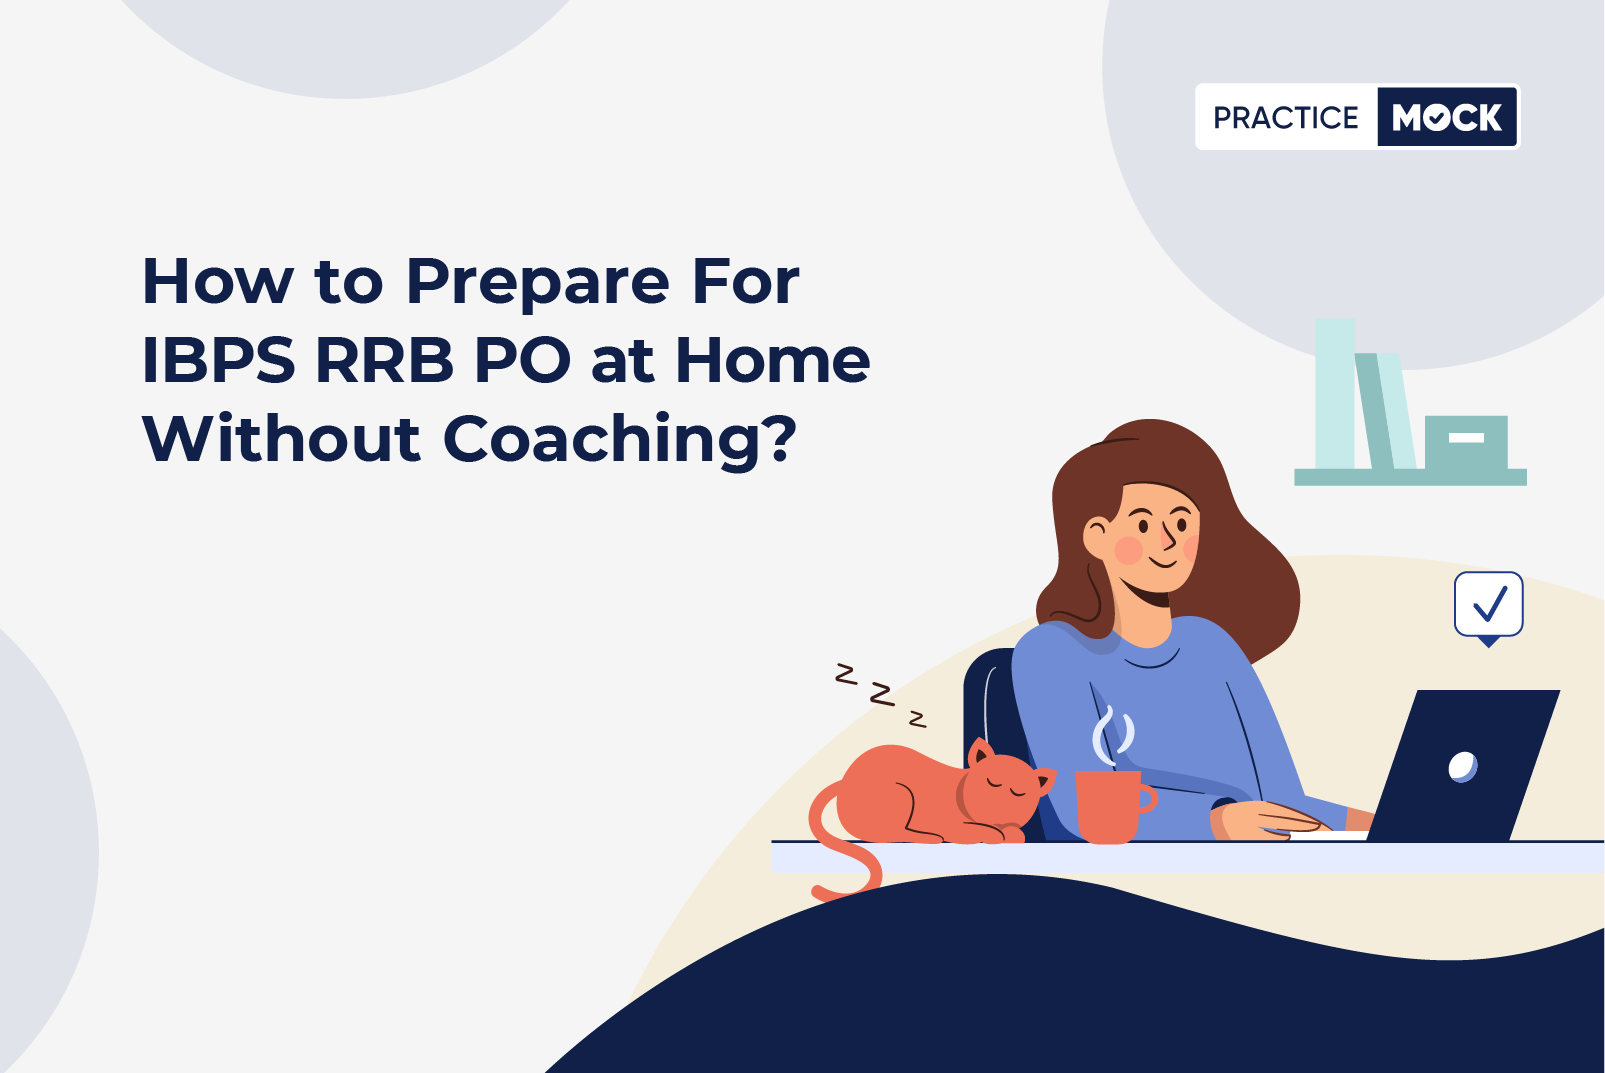 Prepare for IBPS RRB PO at home without coaching